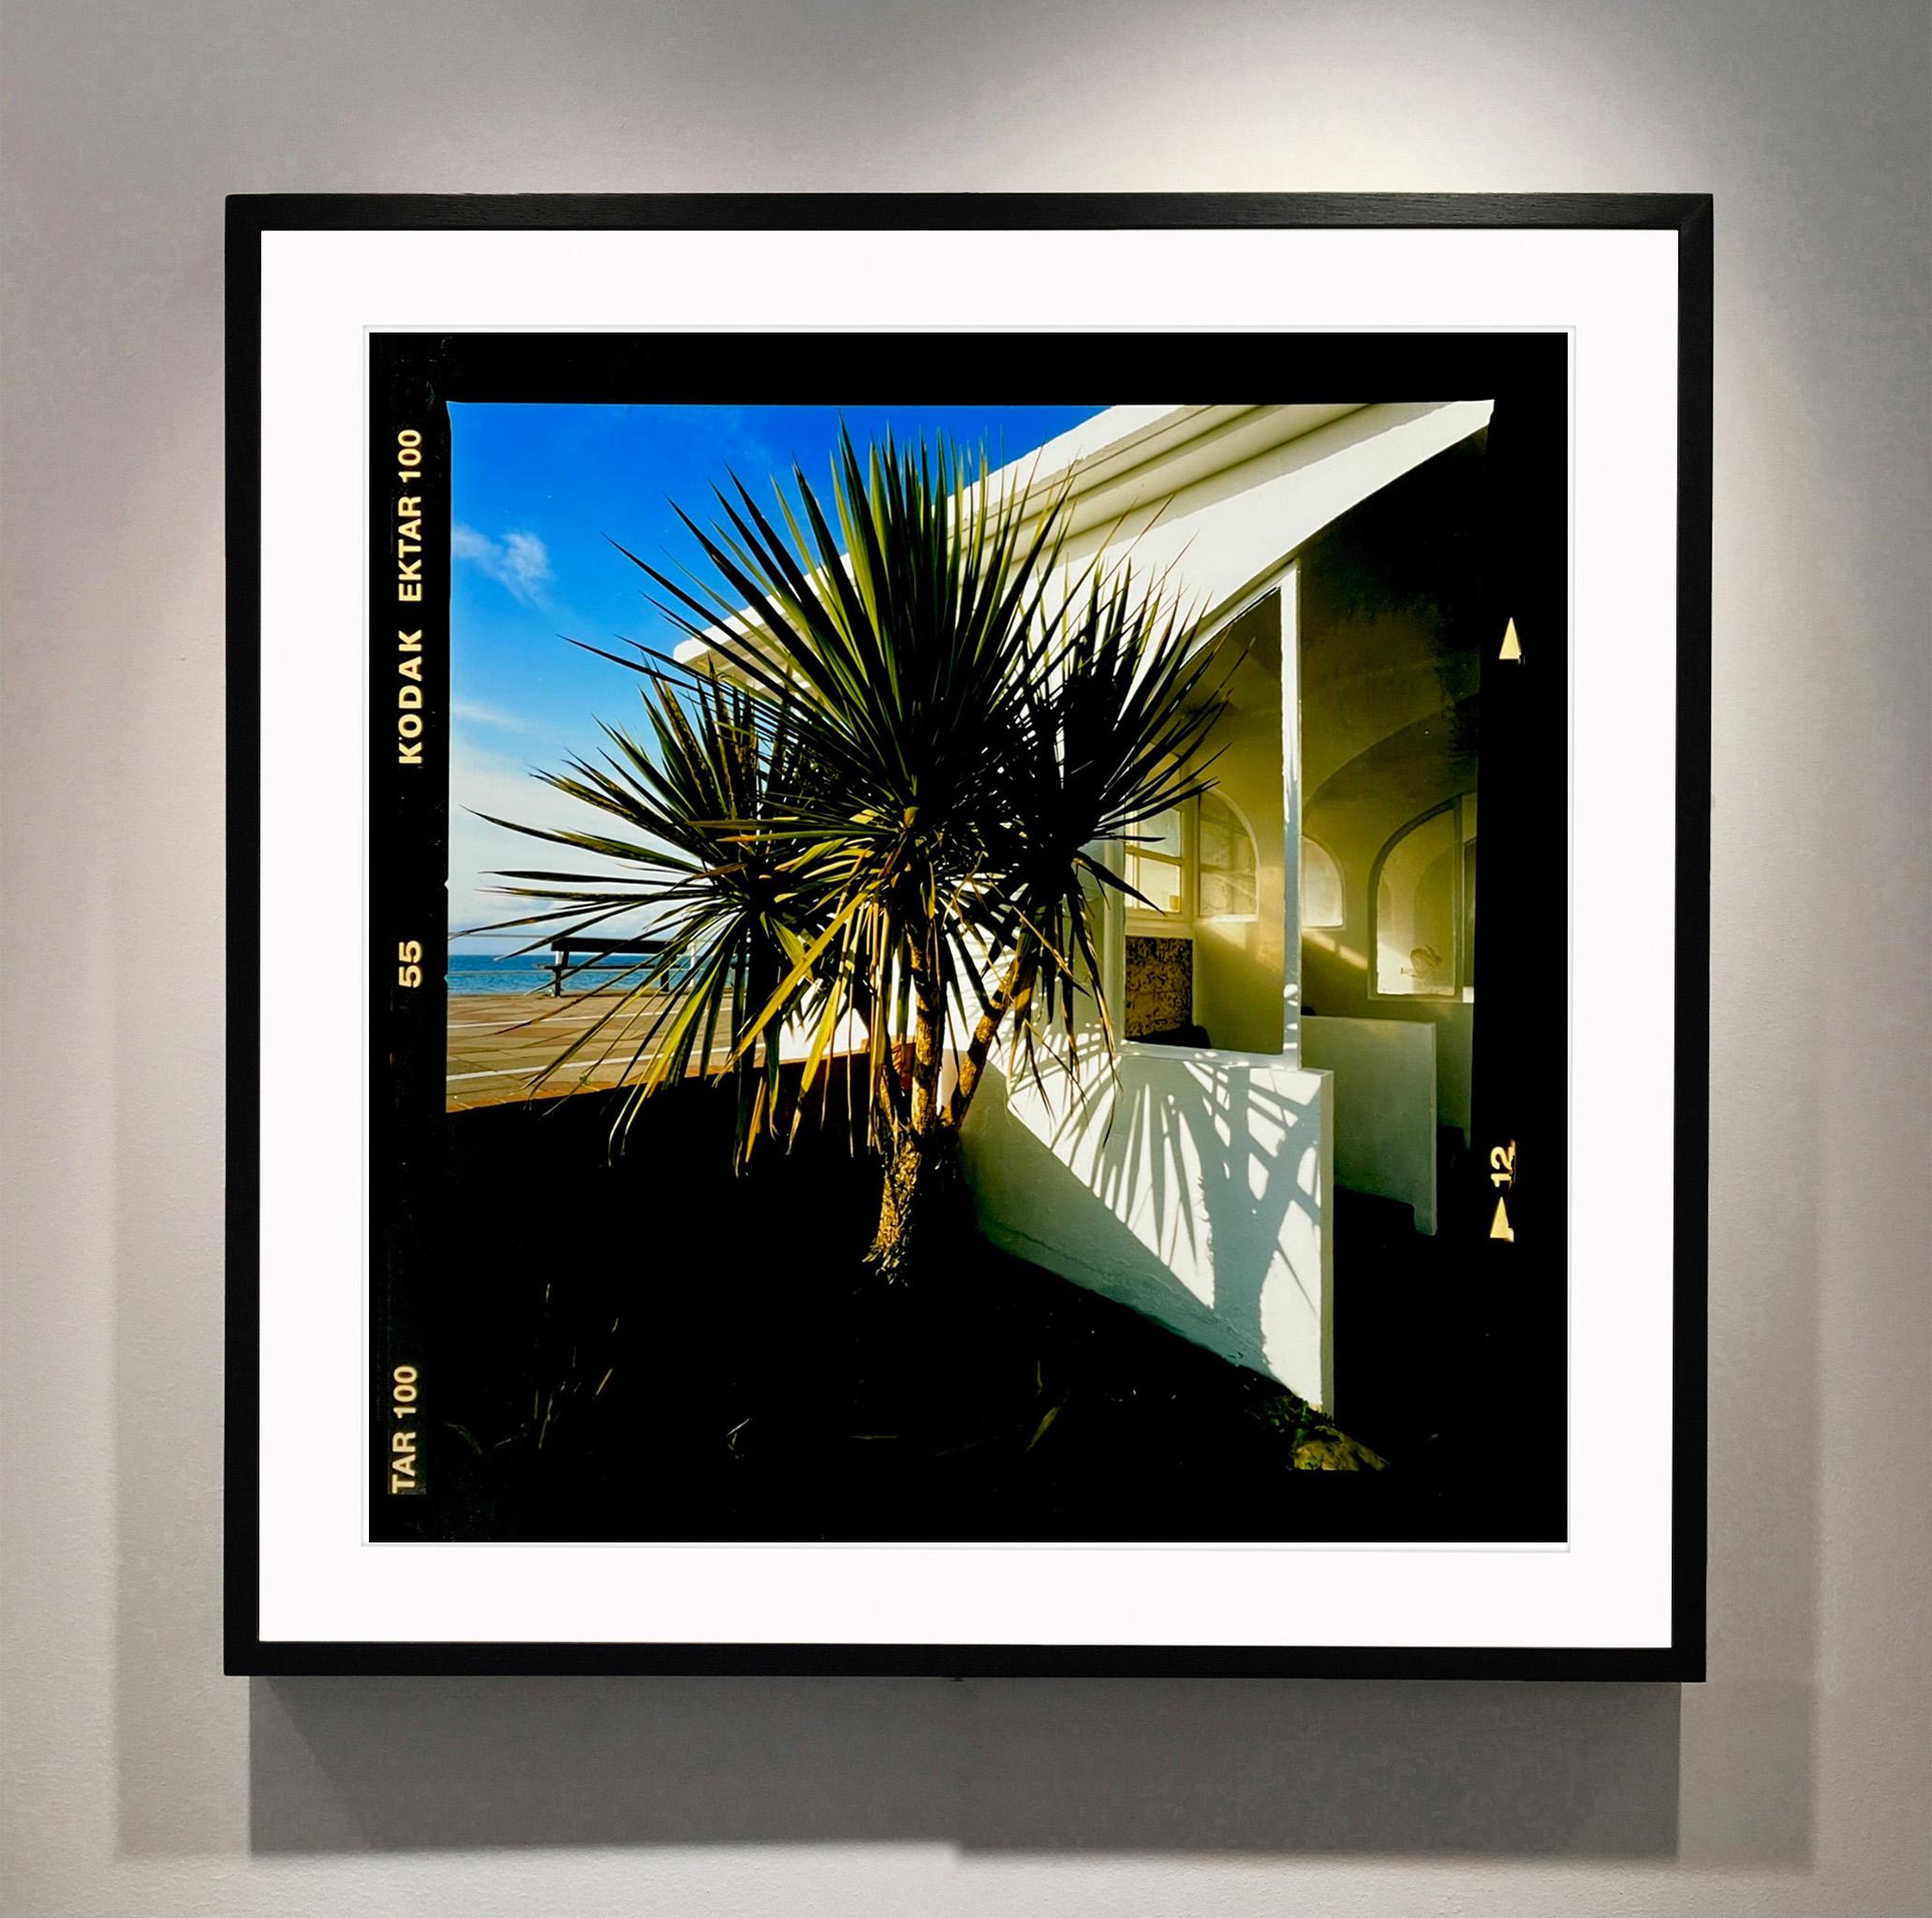 Palms, St Leonard's-on-Sea - British Color Photography - Contemporary Print by Richard Heeps